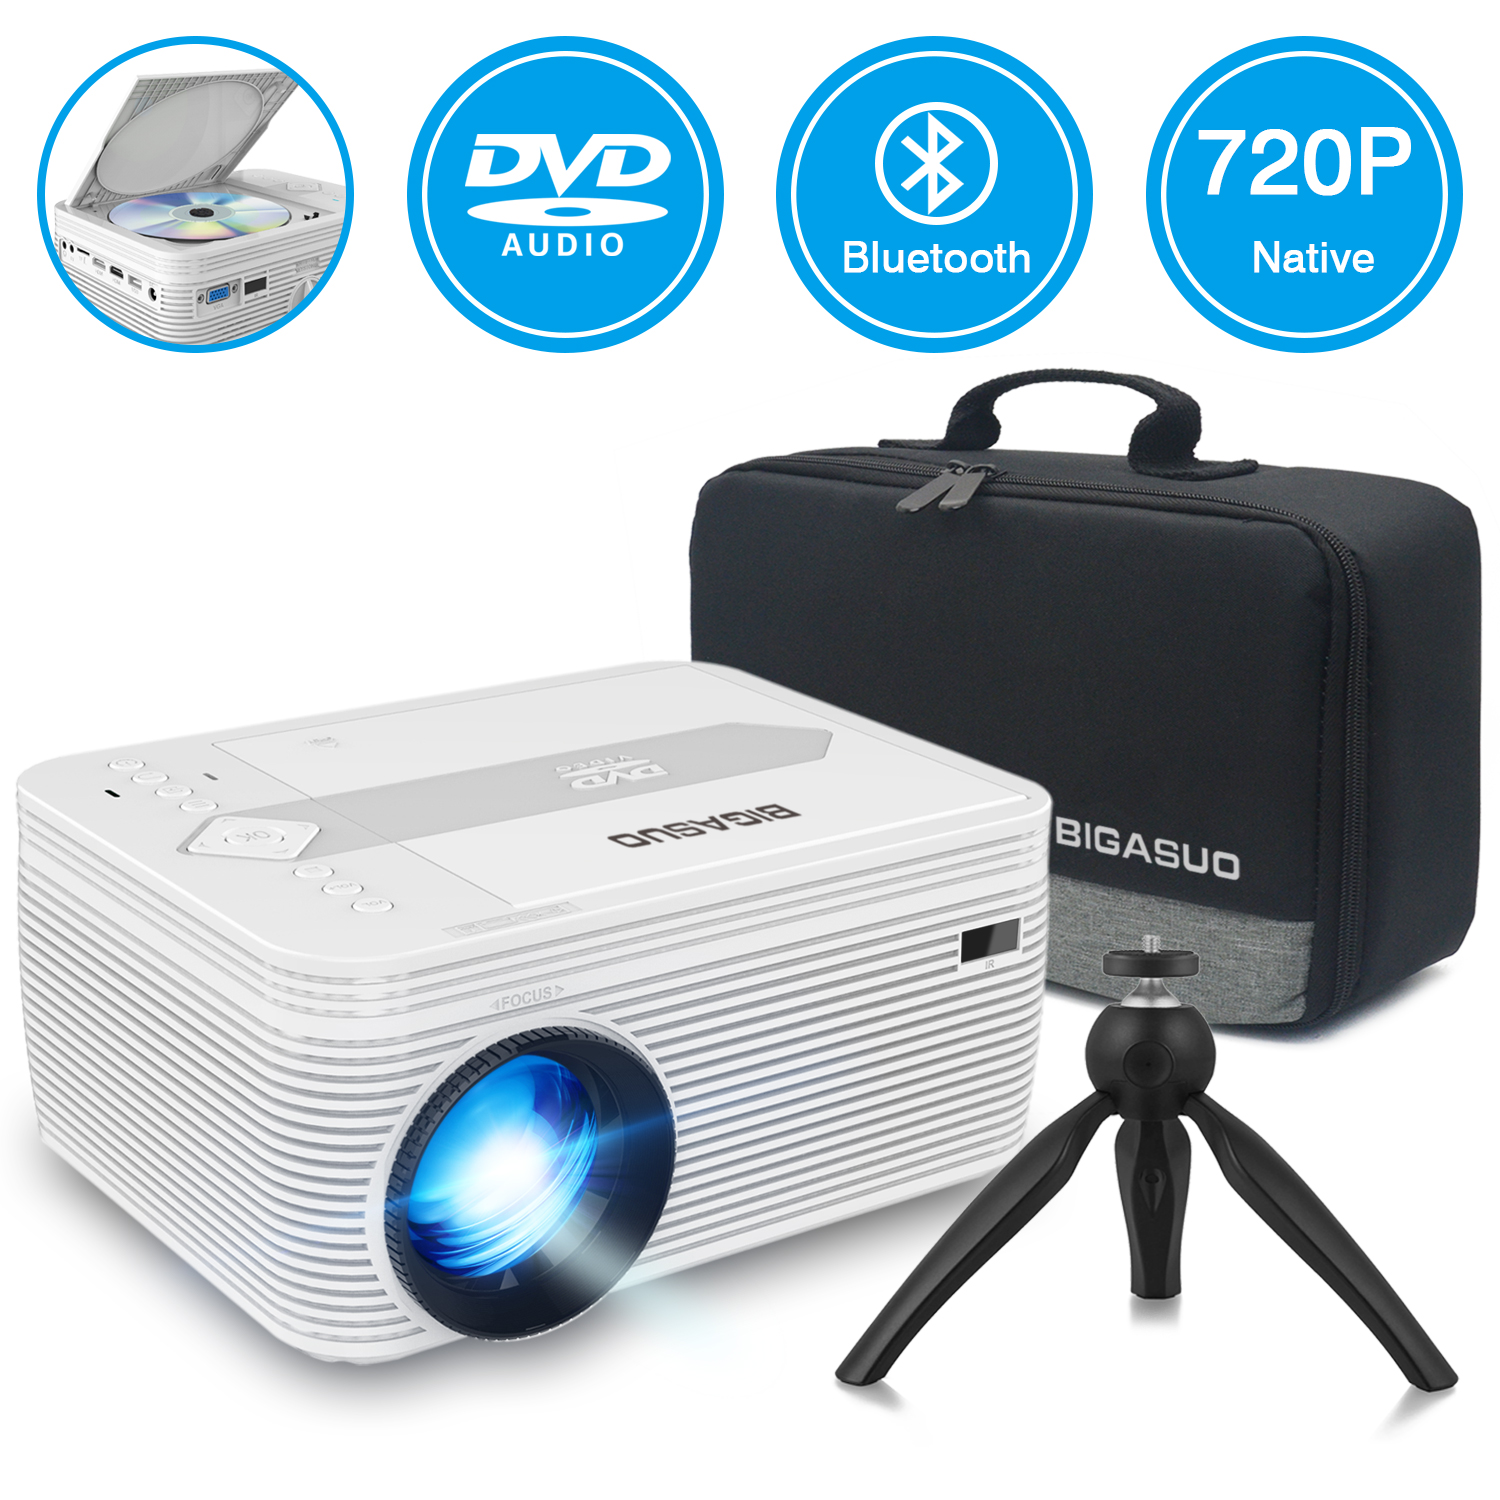 BIGASUO Projector Native 720P, Portable Support 1080P Projector with 55000 Hours Lamp Life, Built in DVD Player, Ideal for Home Theater - image 1 of 6